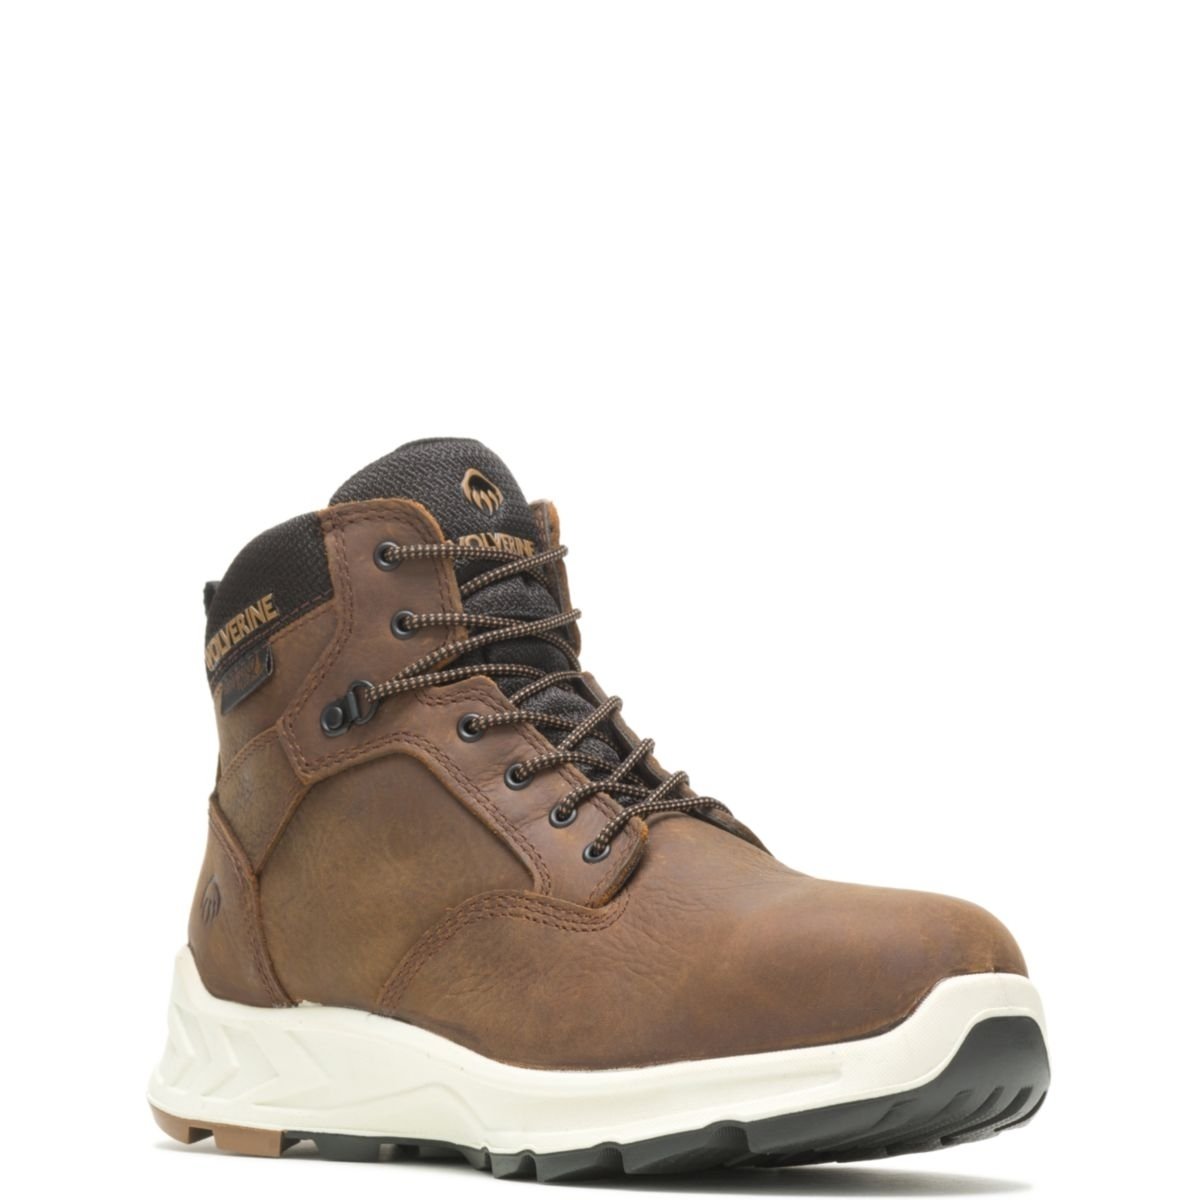 WOLVERINE Men's ShiftPlus Work LX 6 Alloy Toe Work Boot Brown - W201156 BROWN - BROWN, 9-M